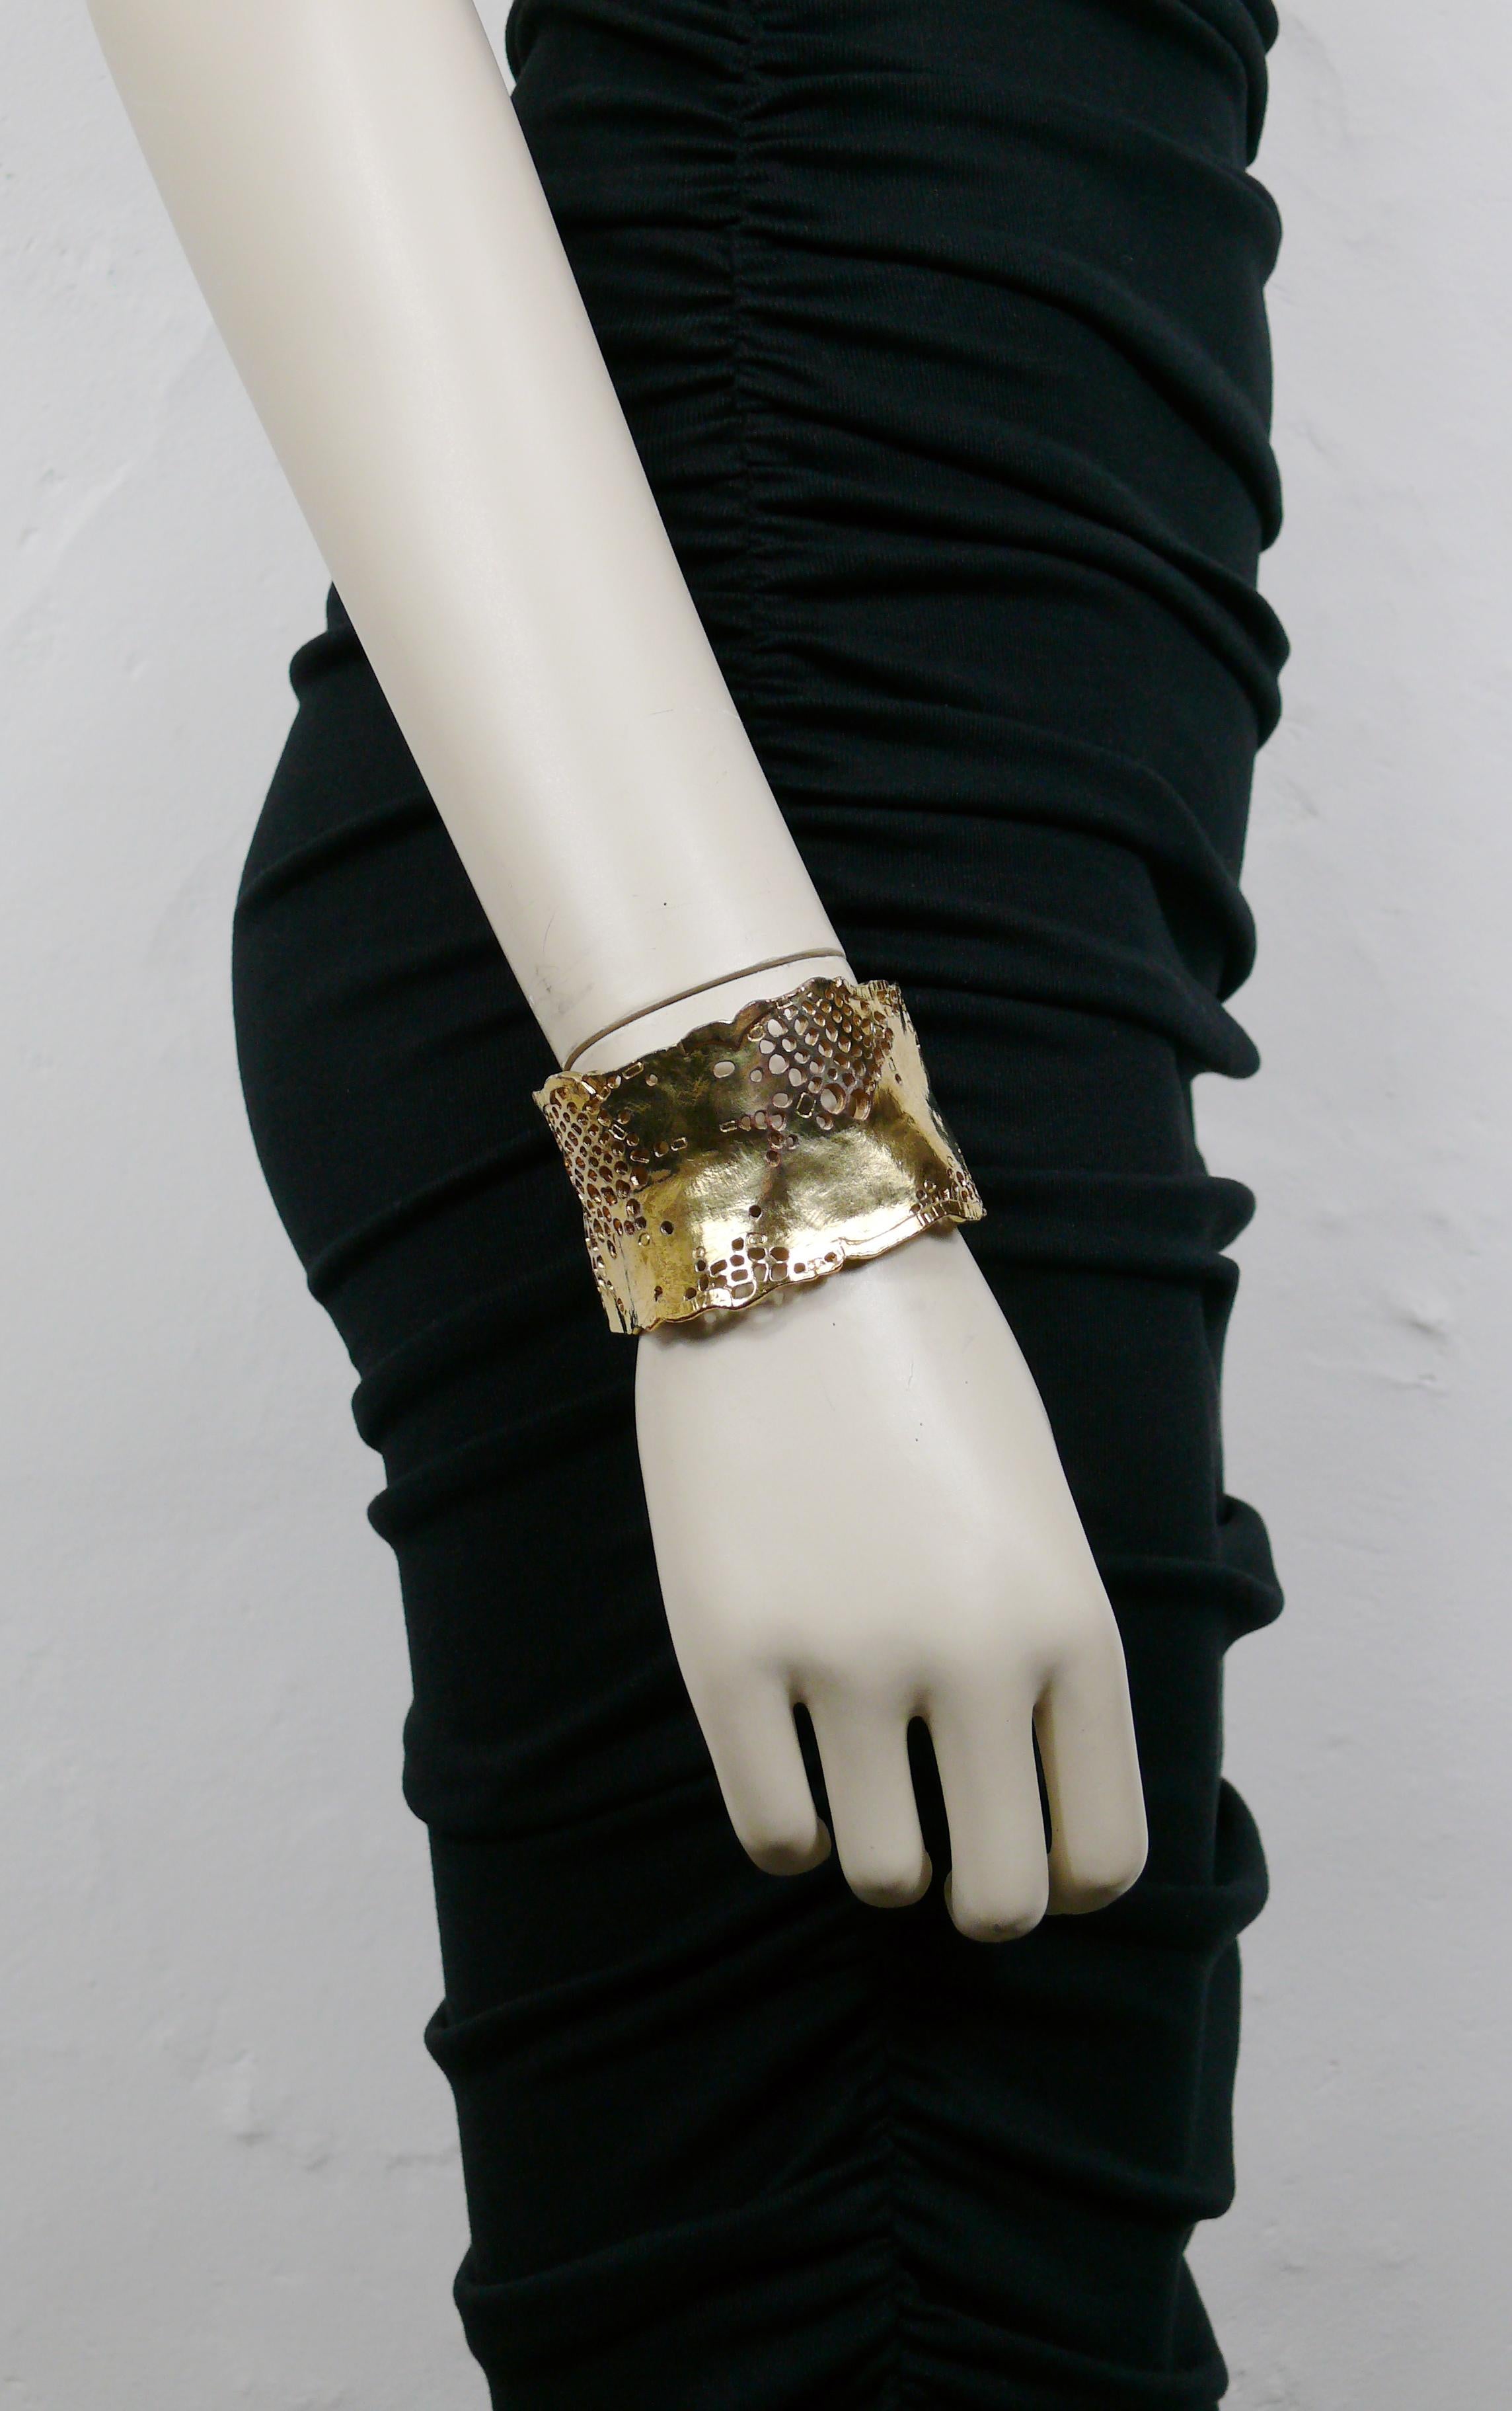 CHRISTIAN LACROIX vintage gold toned cuff bracelet featuring a perforated design.

Marked CHRISTIAN LACROIX CL Made in France.

Indicative measurements : inner min. circumference approx. 16.34 cm (6.43 inches) / max. width approx. 4.3 cm (1.69